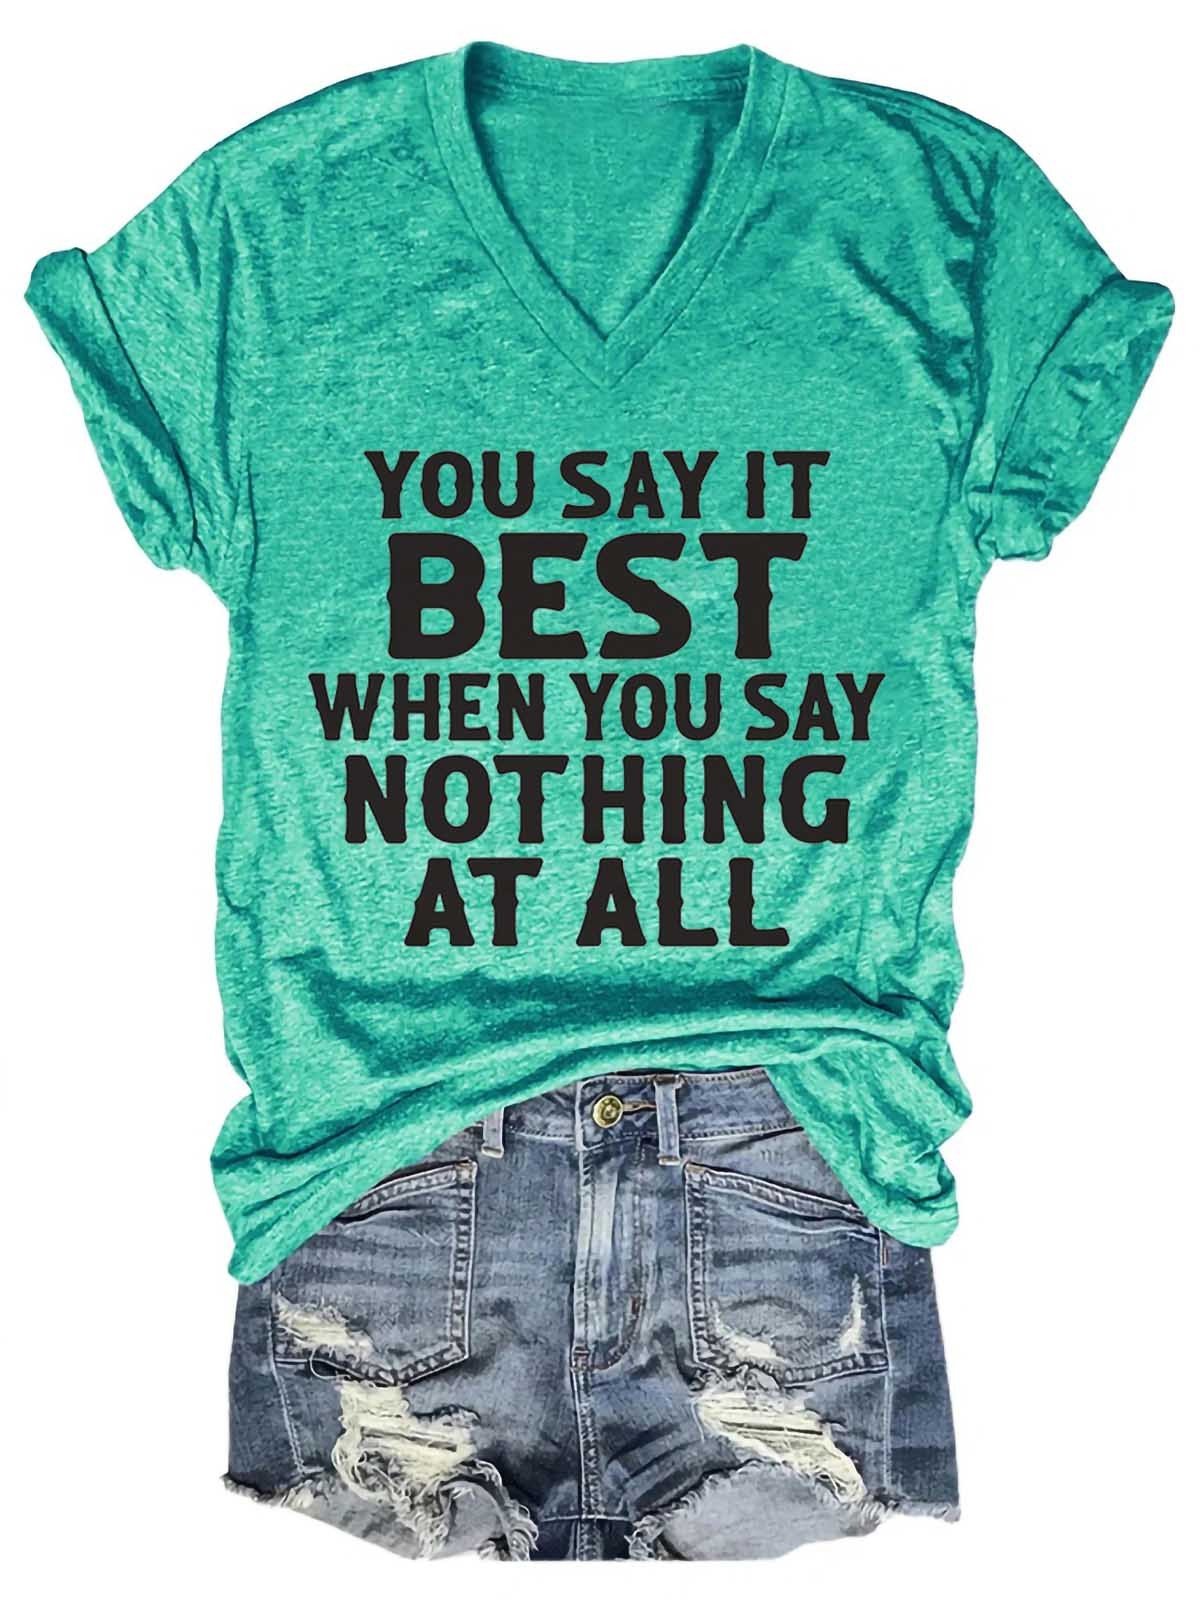 Women's You Say It Best When You Said Nothing At All V-Neck T-Shirt - Outlets Forever